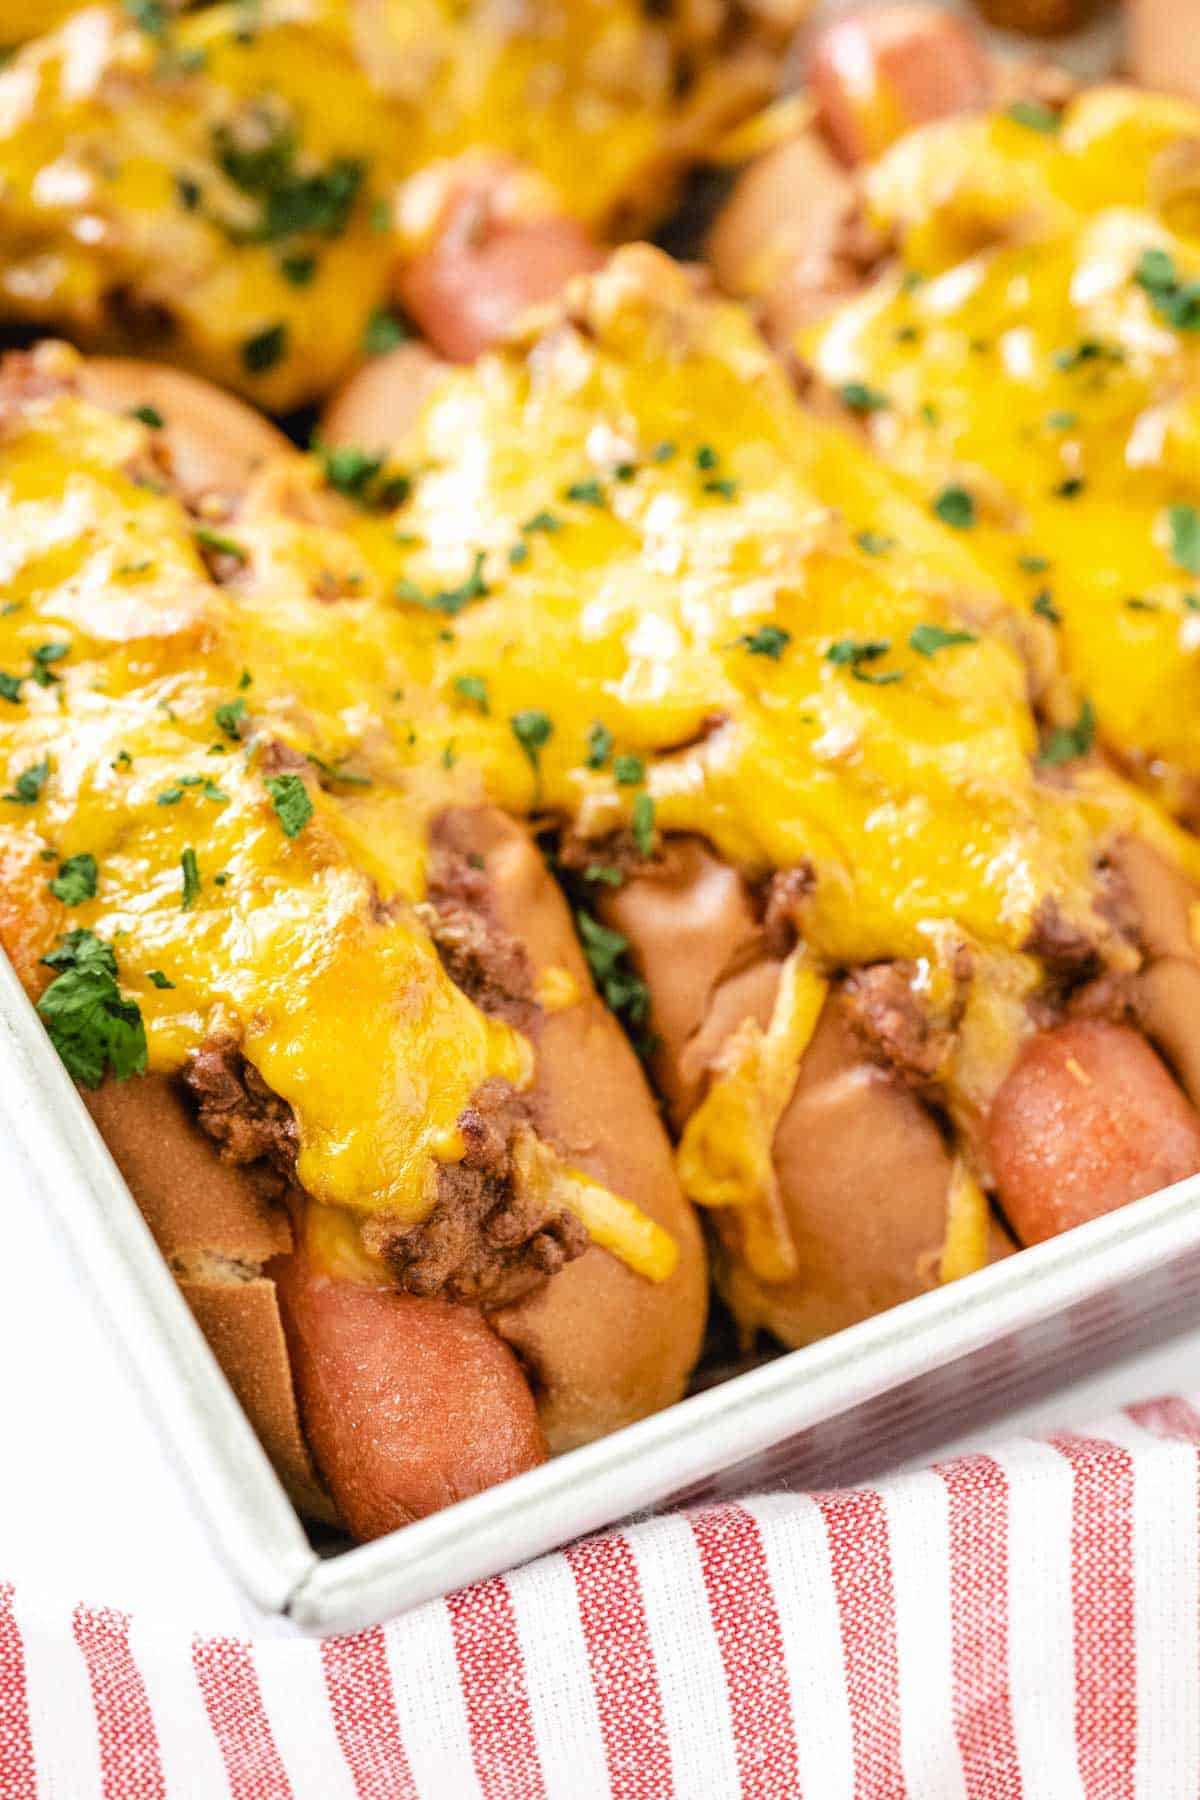 Hot dogs baked in a baking pan with chili and cheese on top.